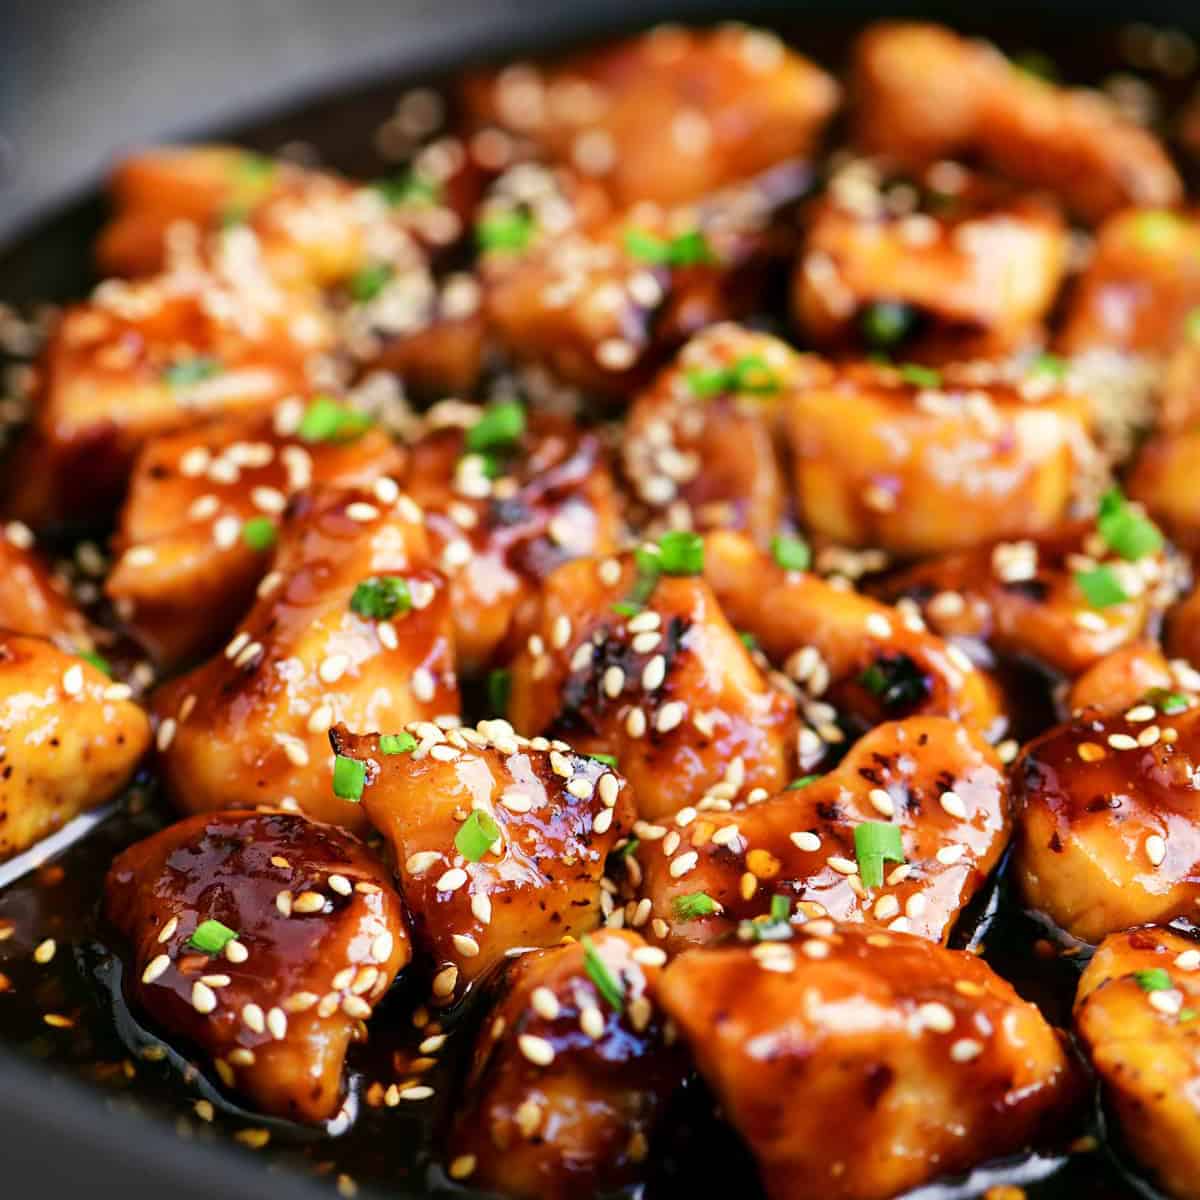 sesame chicken pieces in sauce topped with sliced green onions.